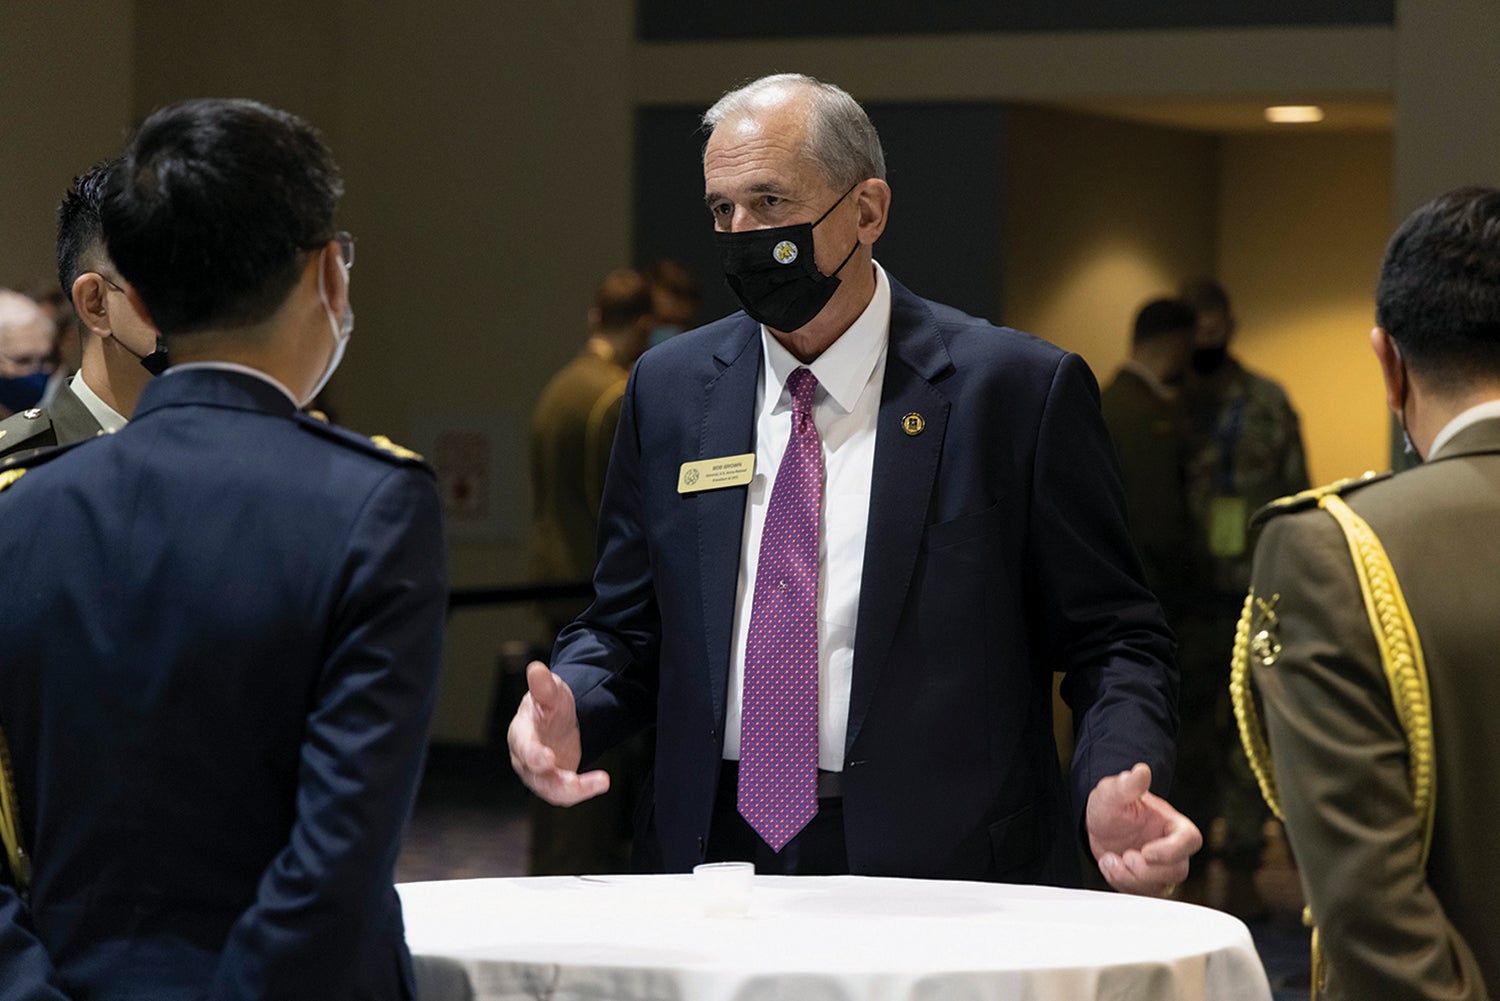 Association of the U.S. Army President and CEO retired Gen. Bob Brown speaks with foreign military representatives during AUSA’s 2021 Annual Meeting and Exposition in Washington, D.C. (Credit: AUSA/Mike Morones)